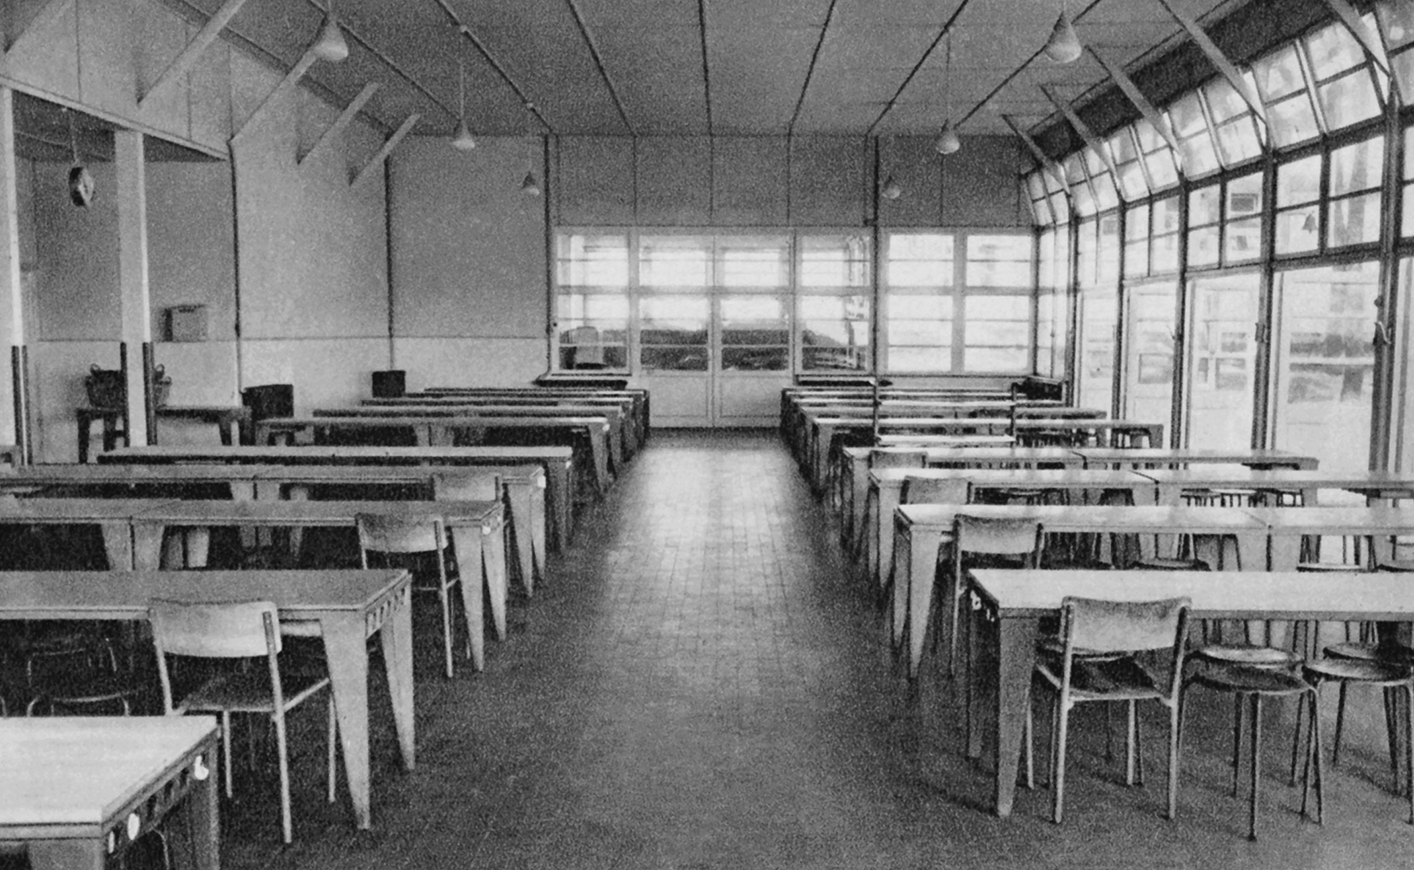 Health camp at Saint-Brévin-l’Océan (architects J. and M. André, 1939). Refectory equipped with tables with profiled legs, ca. 1940.